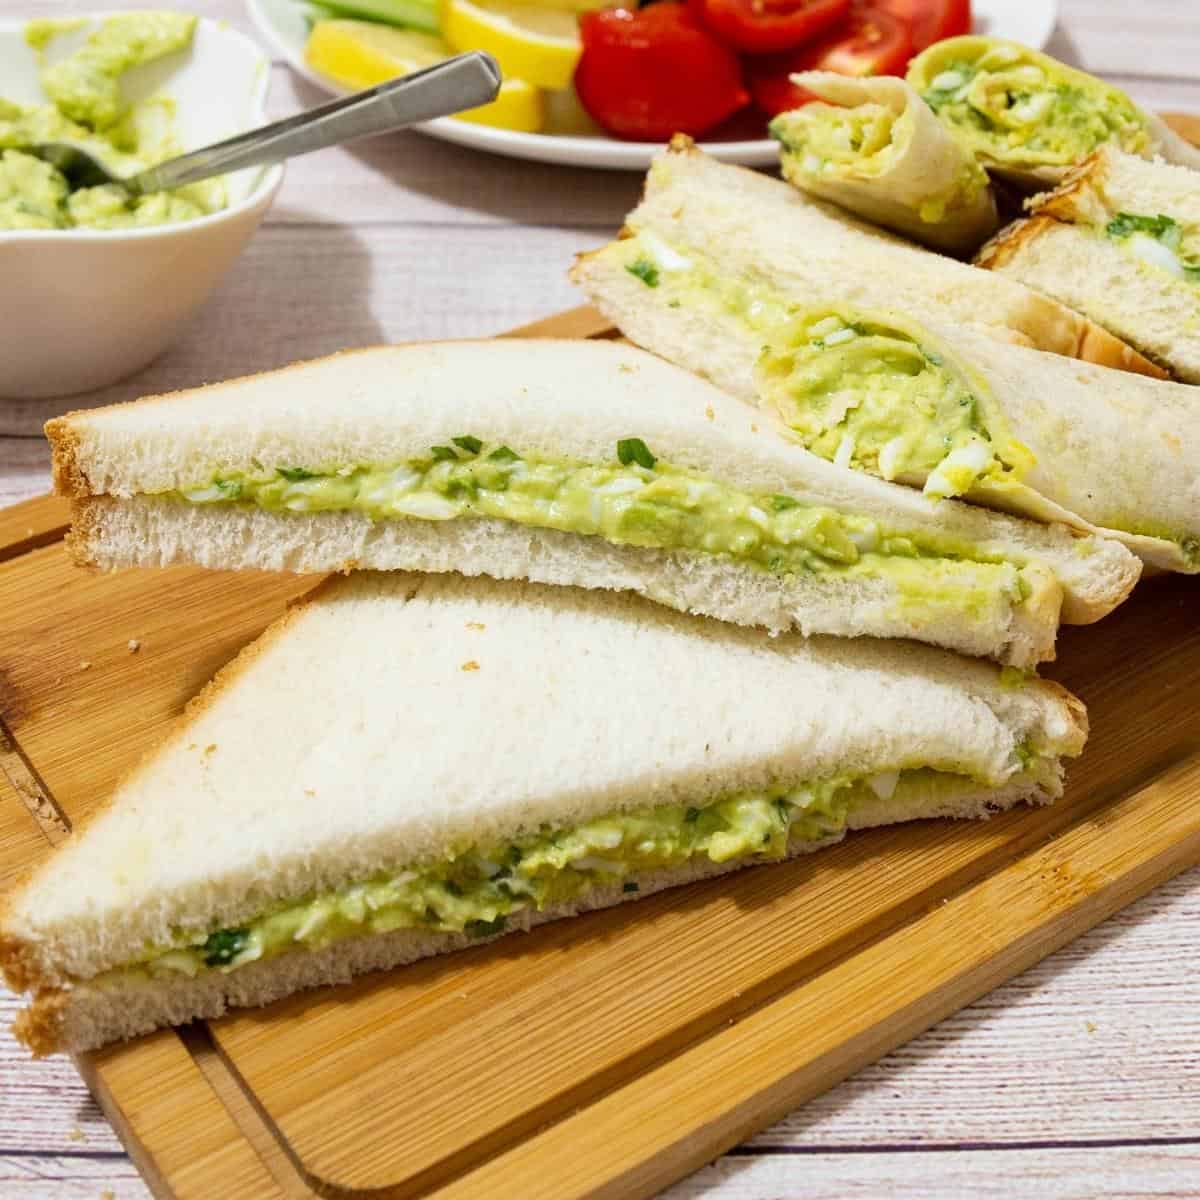 Sandwiches on a wooden board.